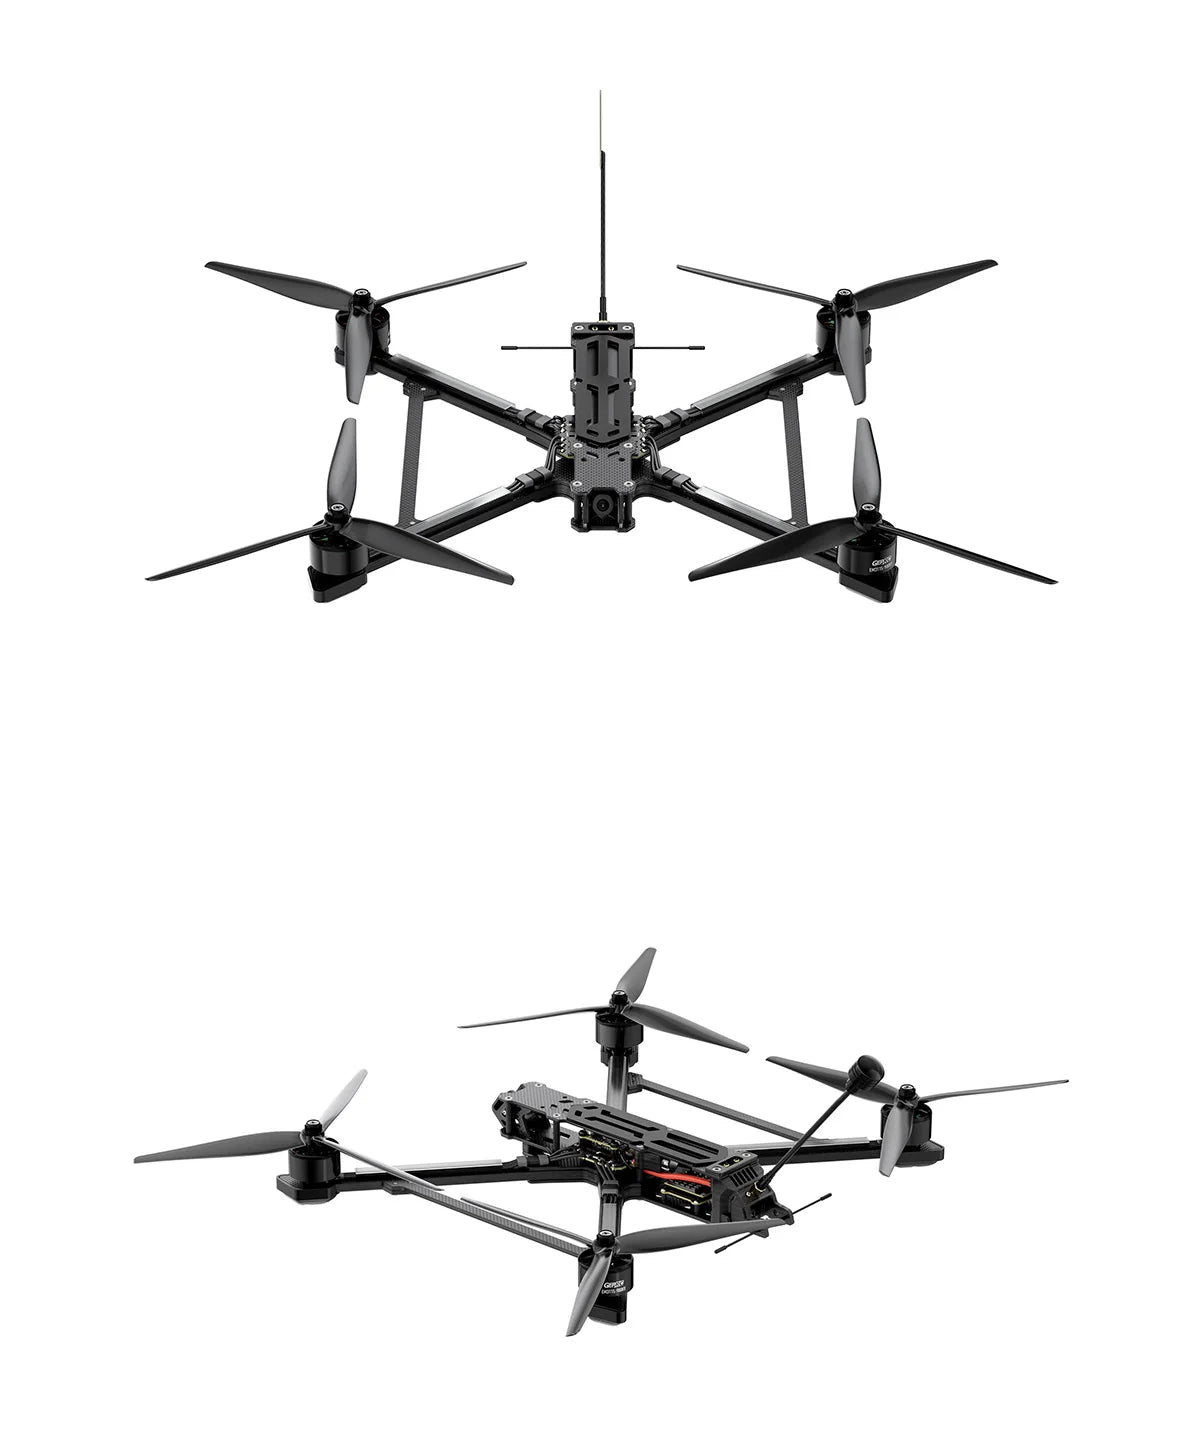 GEPRC EF10 5.8G 1.6W Long Range 10inch FPV, We are NOT liable for ANY import tax, custom fee, Remote surcharge or customs